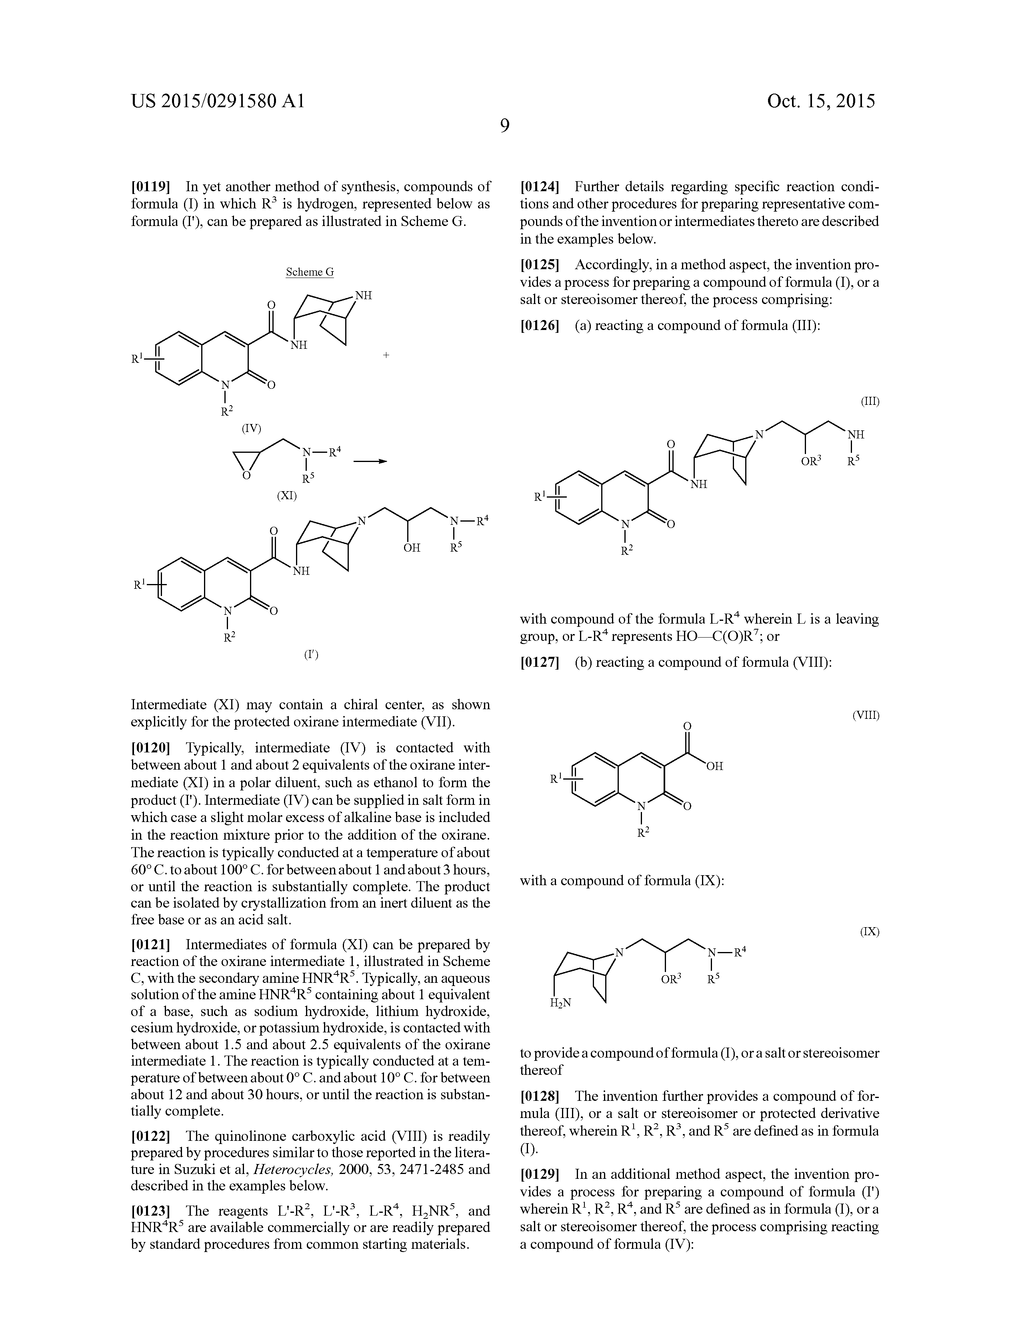 QUINOLINONE-CARBOXAMIDE COMPOUNDS AS 5-HT4 RECEPTOR AGONISTS - diagram, schematic, and image 10